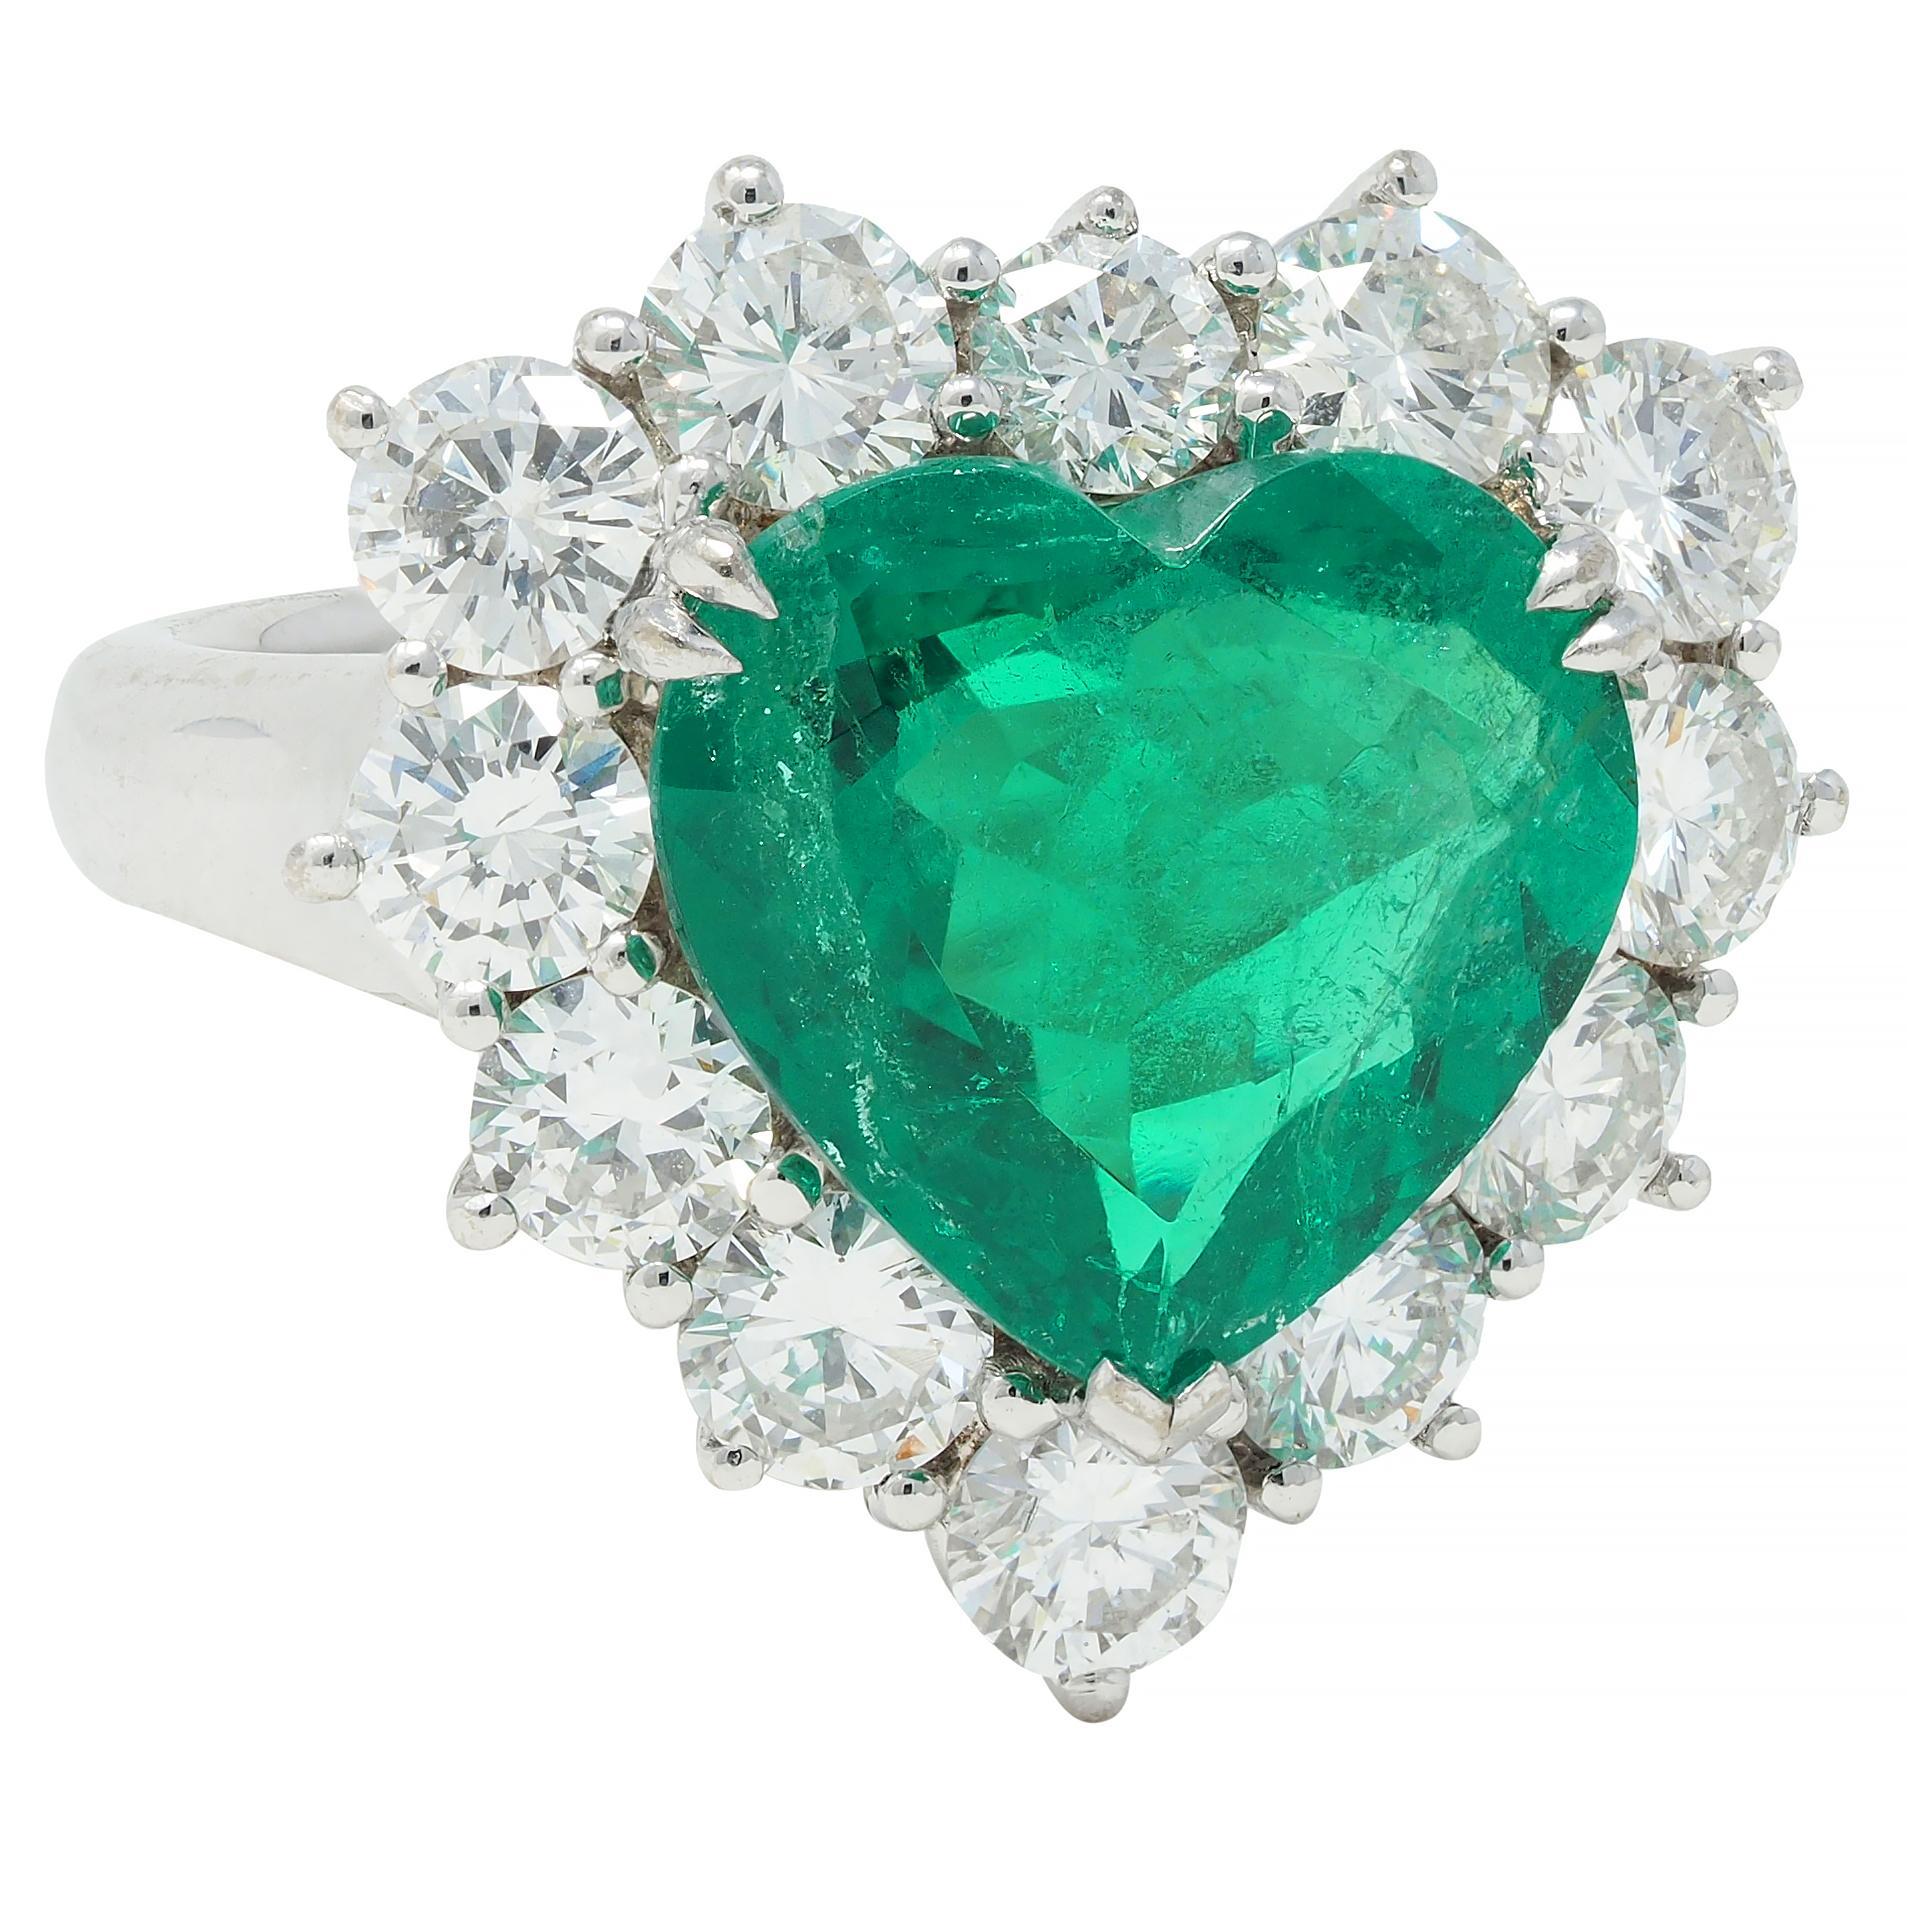 Centering a heart cut emerald weighing 4.62 carats - transparent medium green in color
Natural Colombian in origin with minor modern clarity enhancement 
Set with split talon prongs with a round brilliant cut diamond halo surround 
Weighing